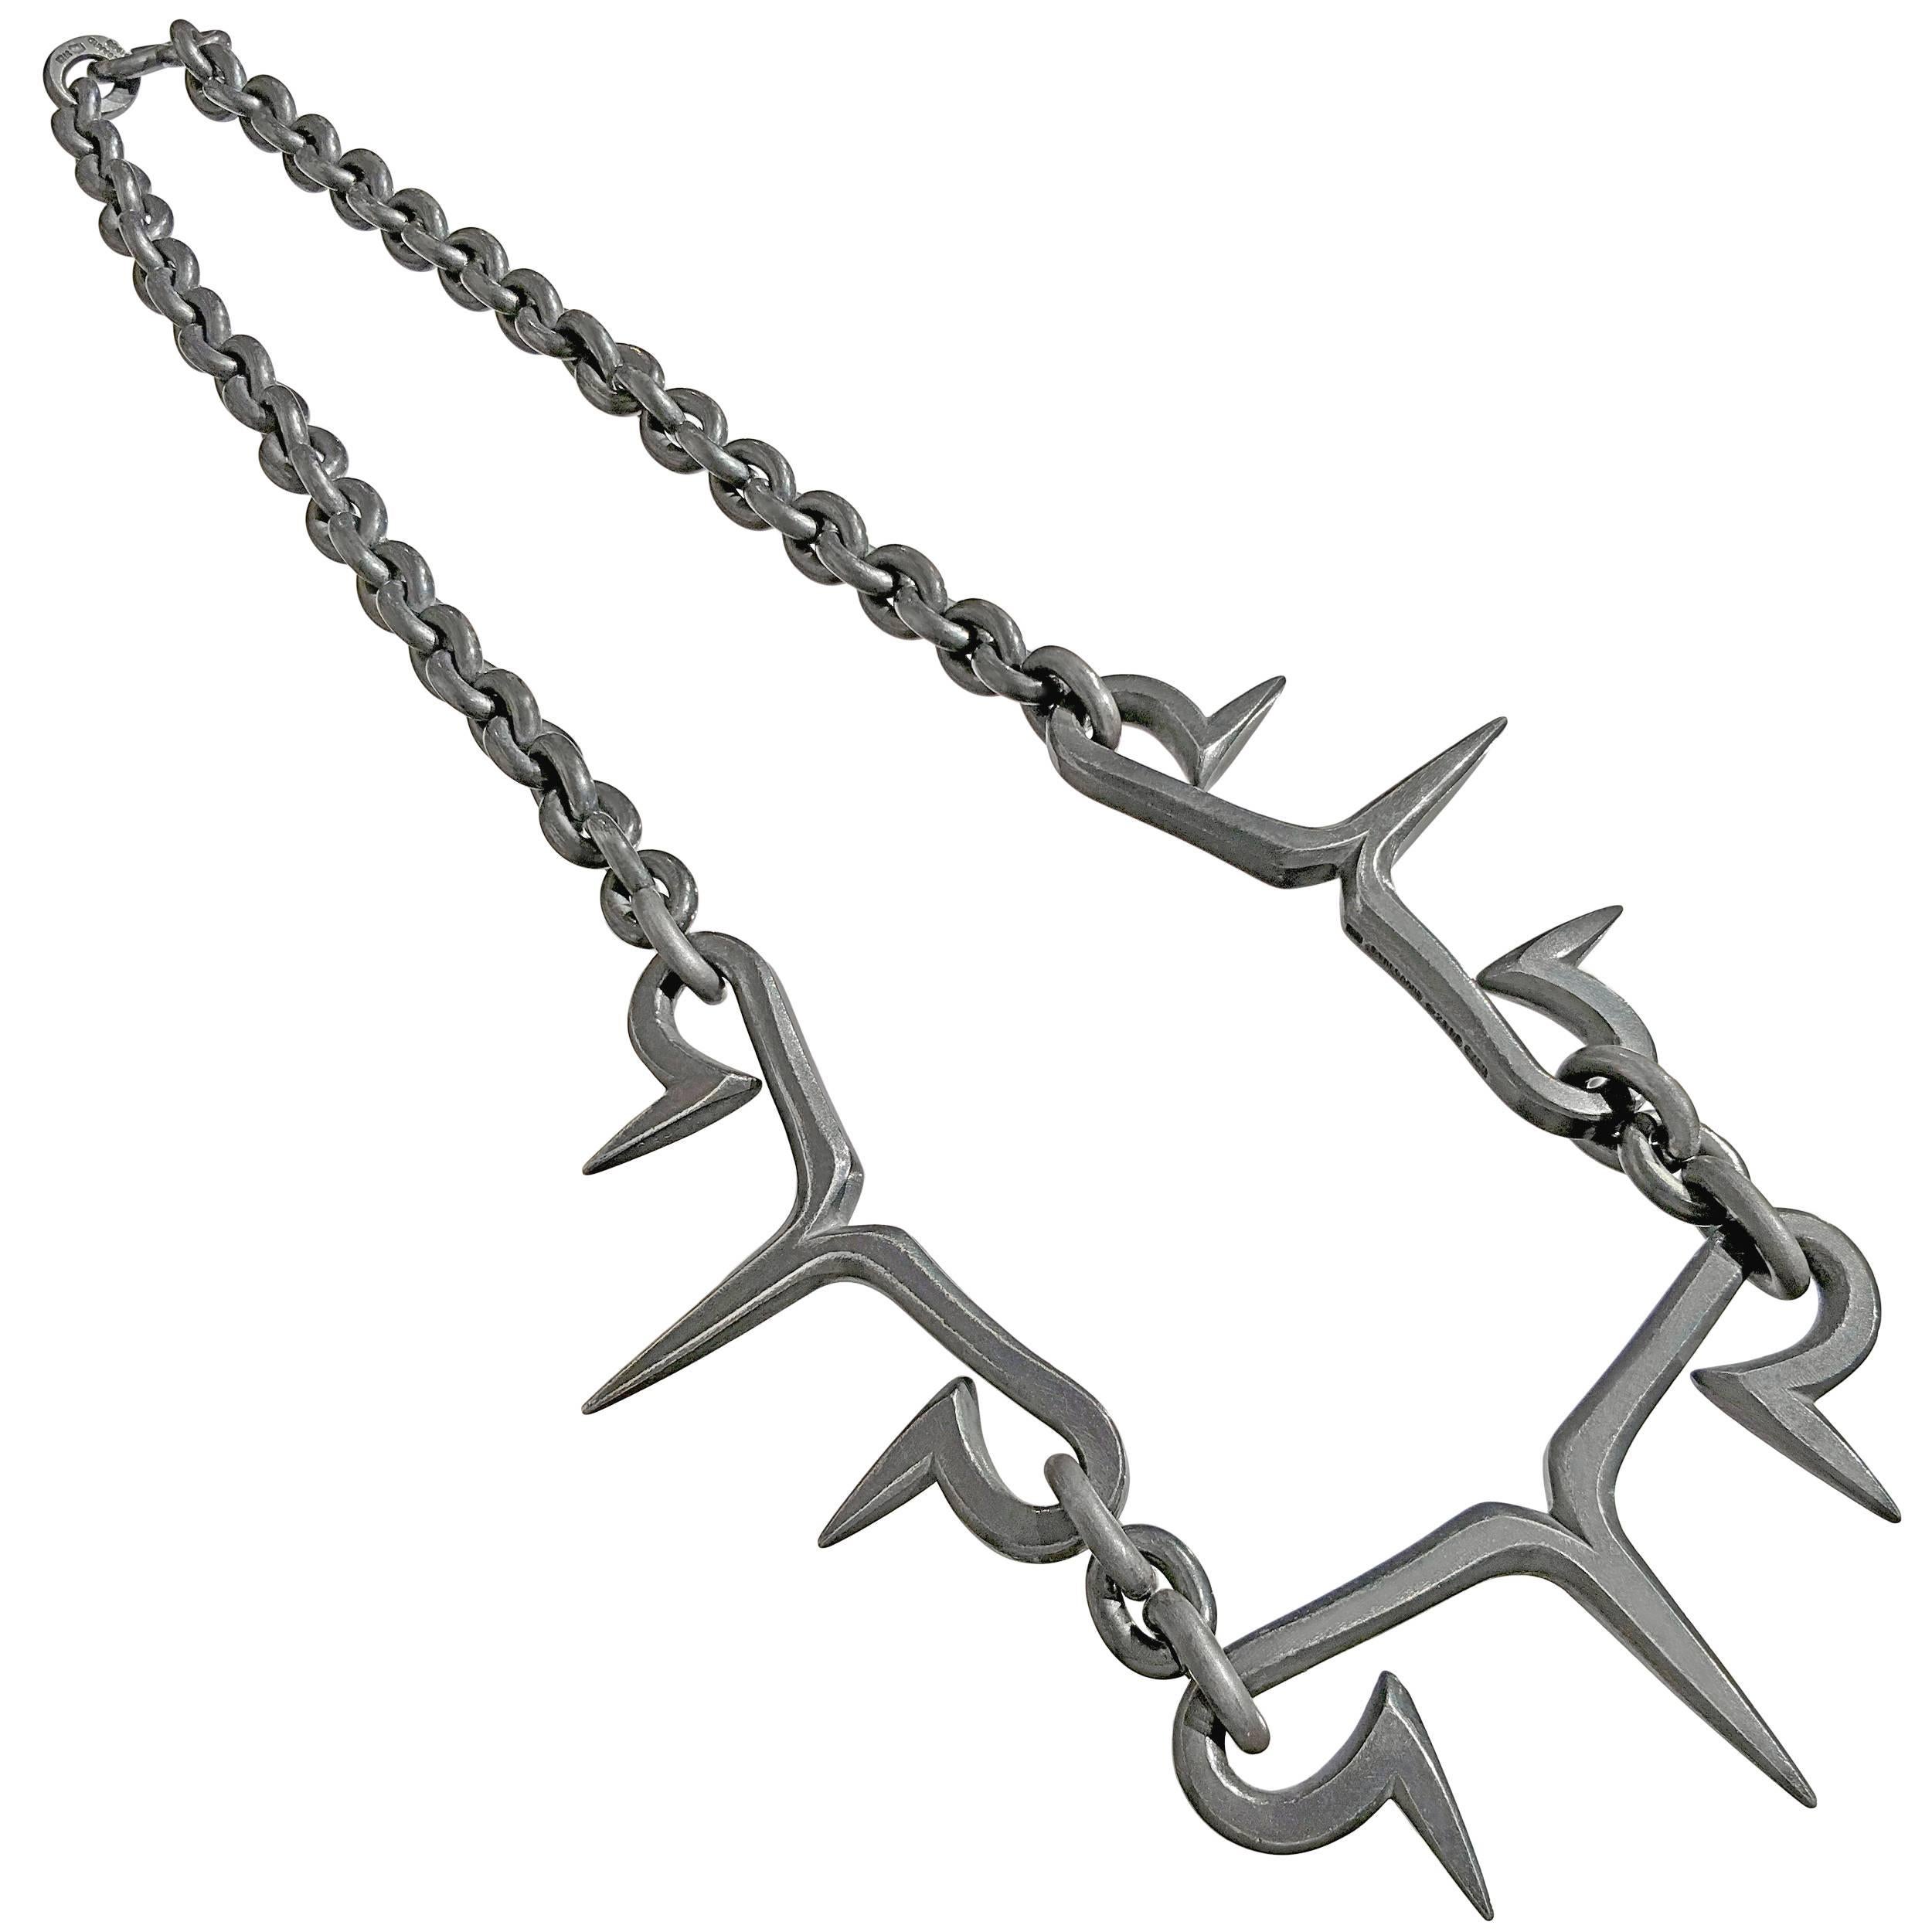 Pedro Boregaard Handmade Oxidized Silver Spike Link Chain Necklace